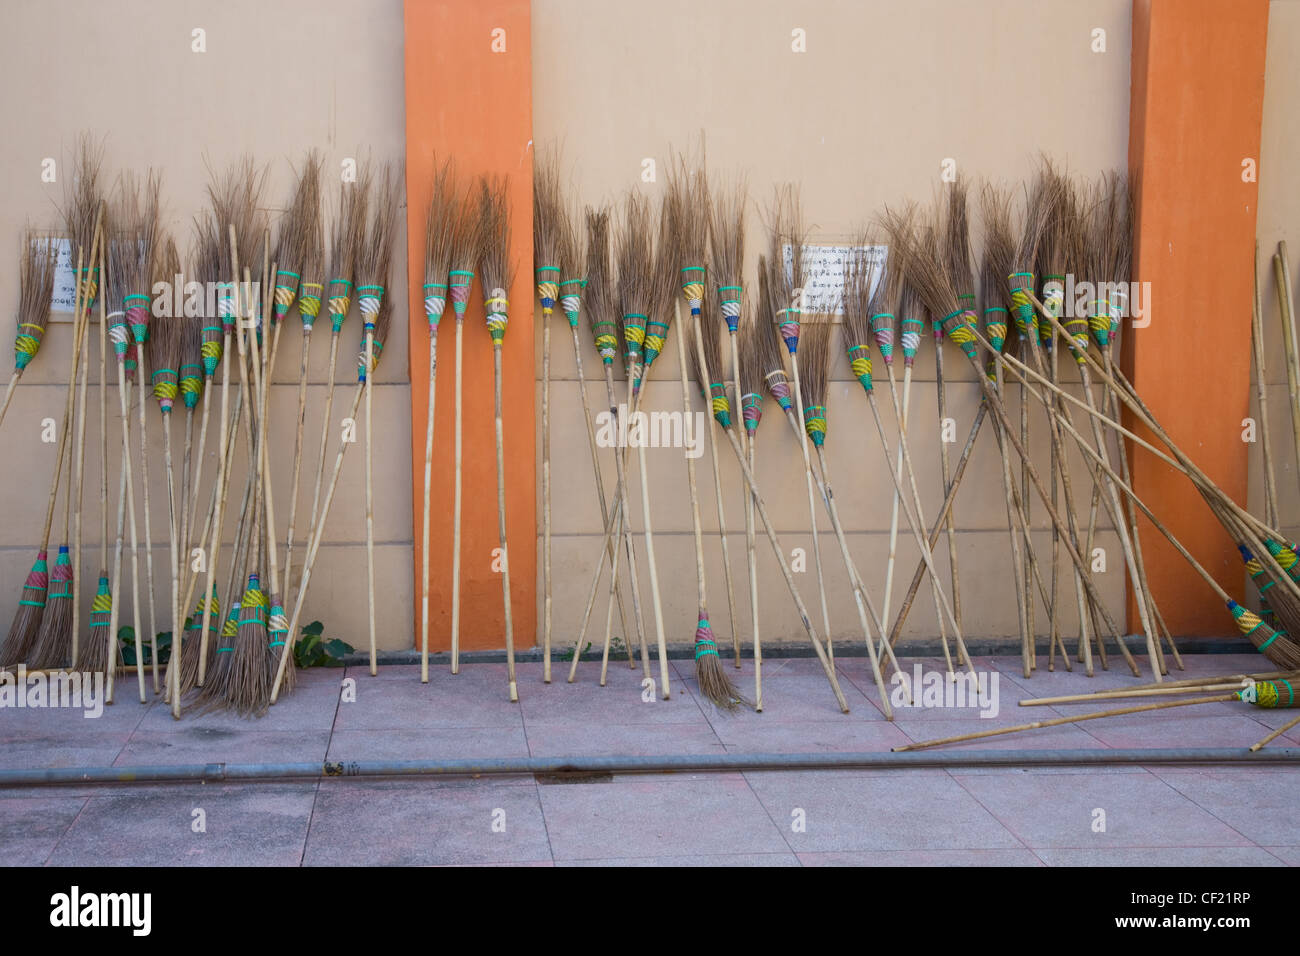 Old wooden brooms ready fly or sweep near wall in myanmar Stock Photo